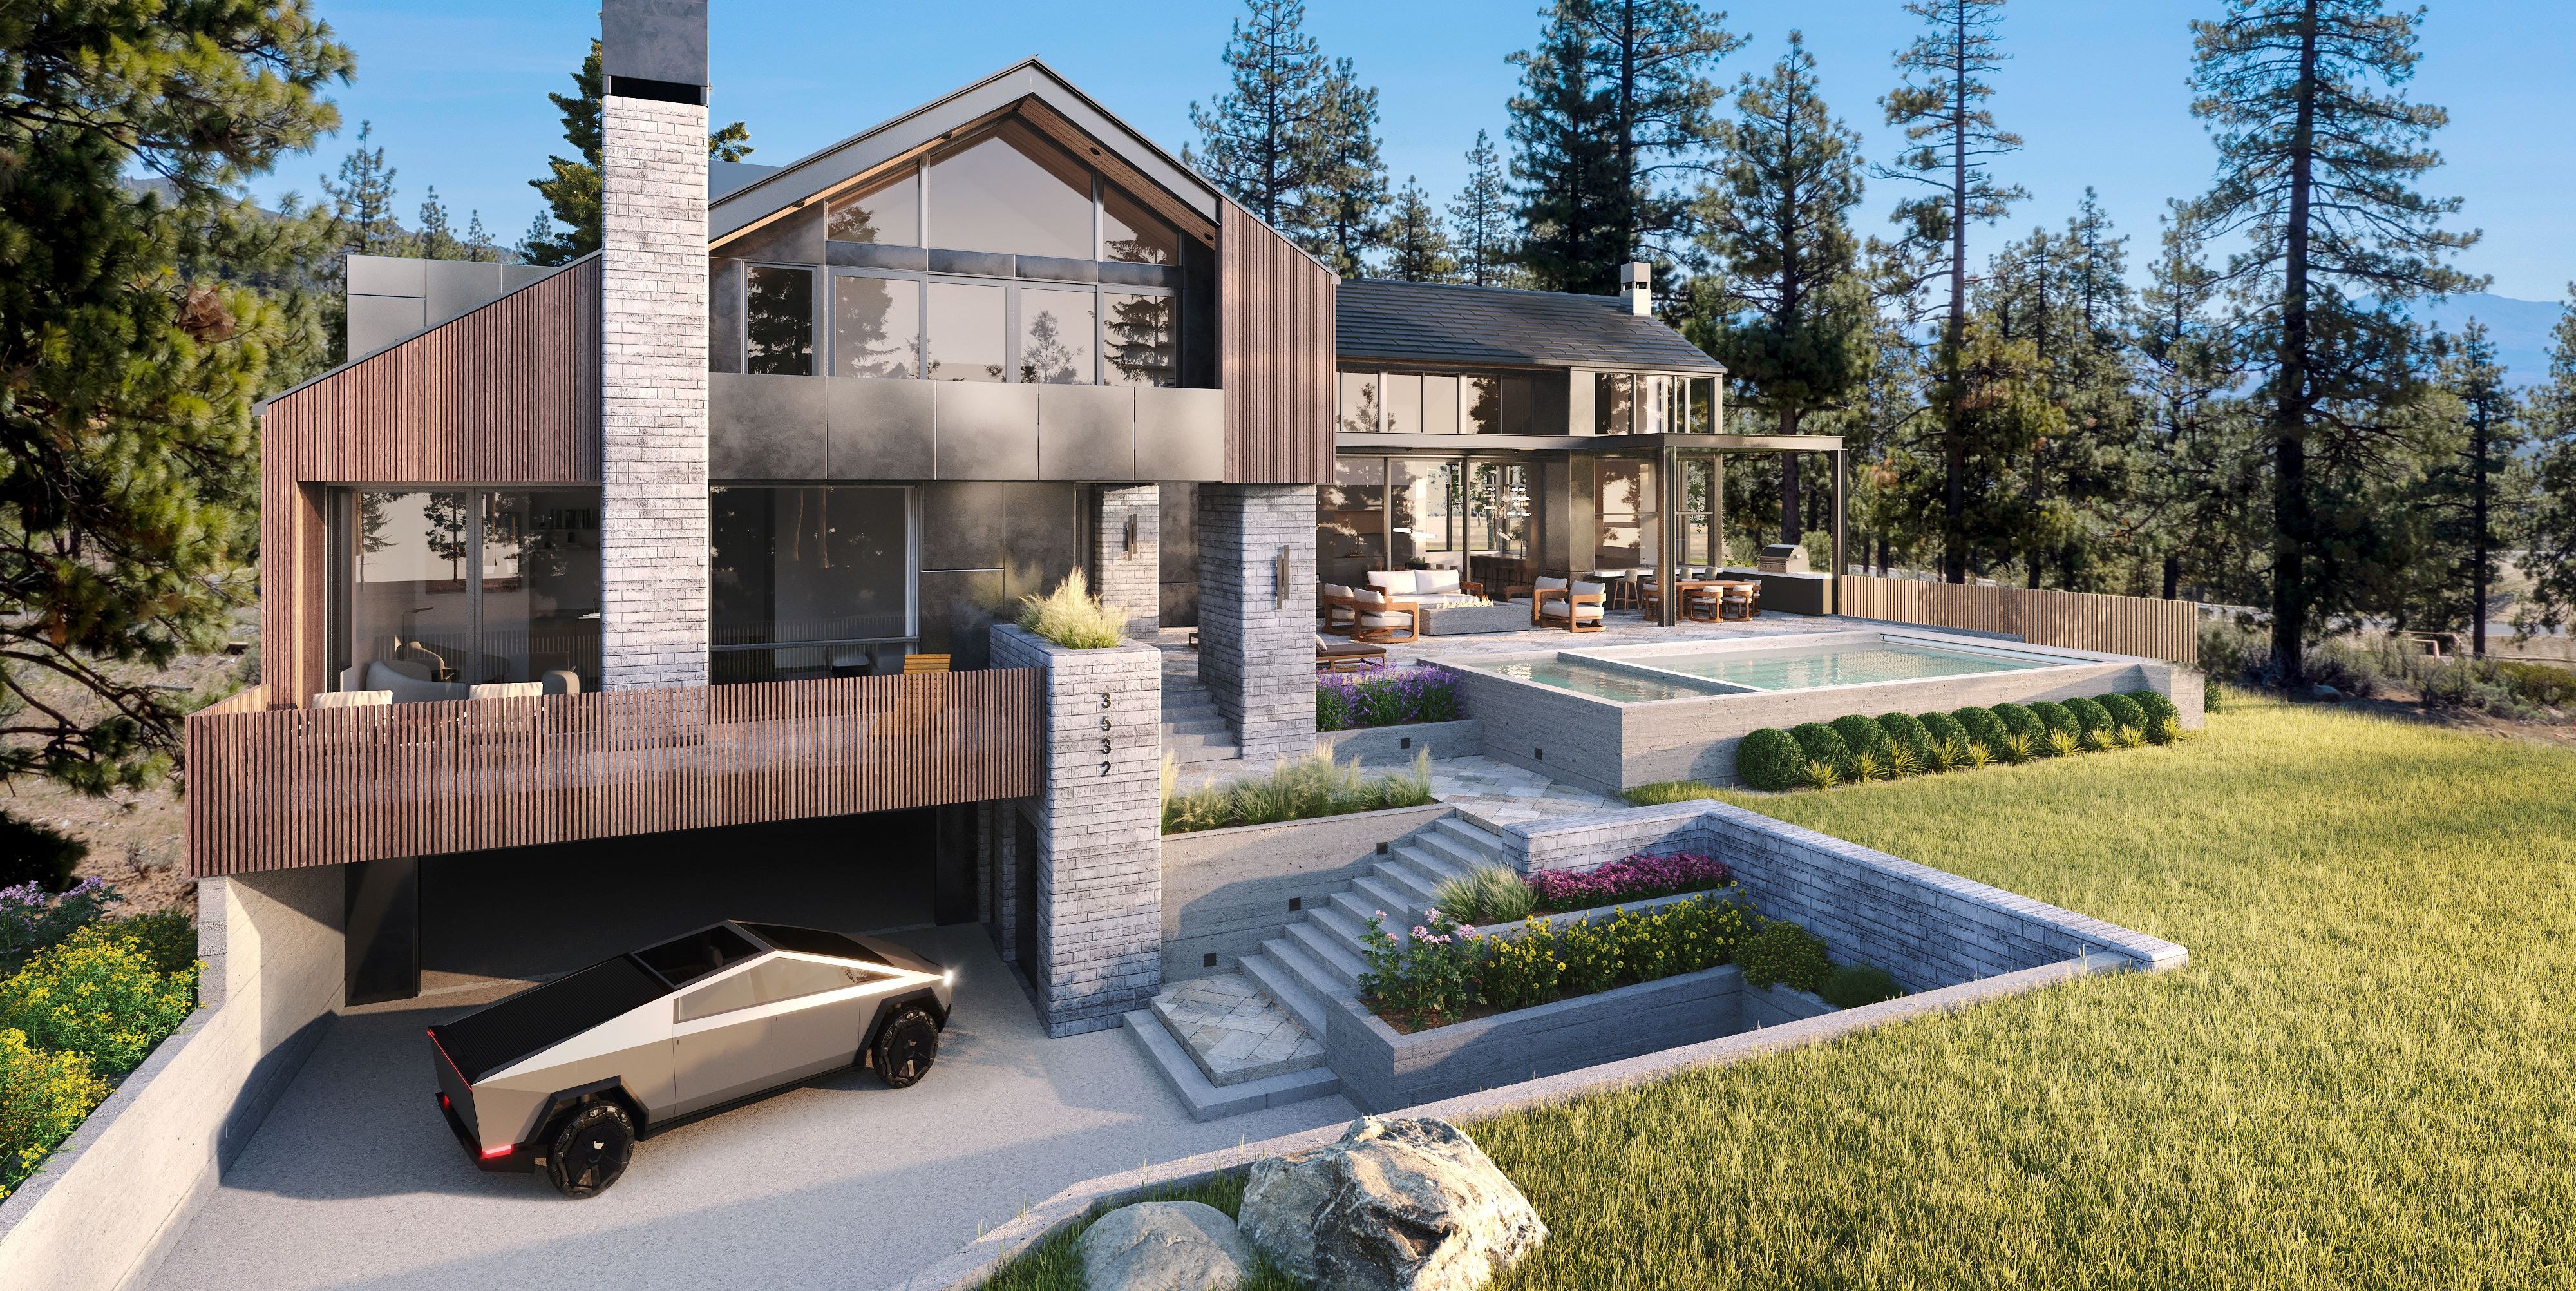 This $12.75 Million Deluxe Lake Tahoe Home Comes with a Tesla Cybertruck